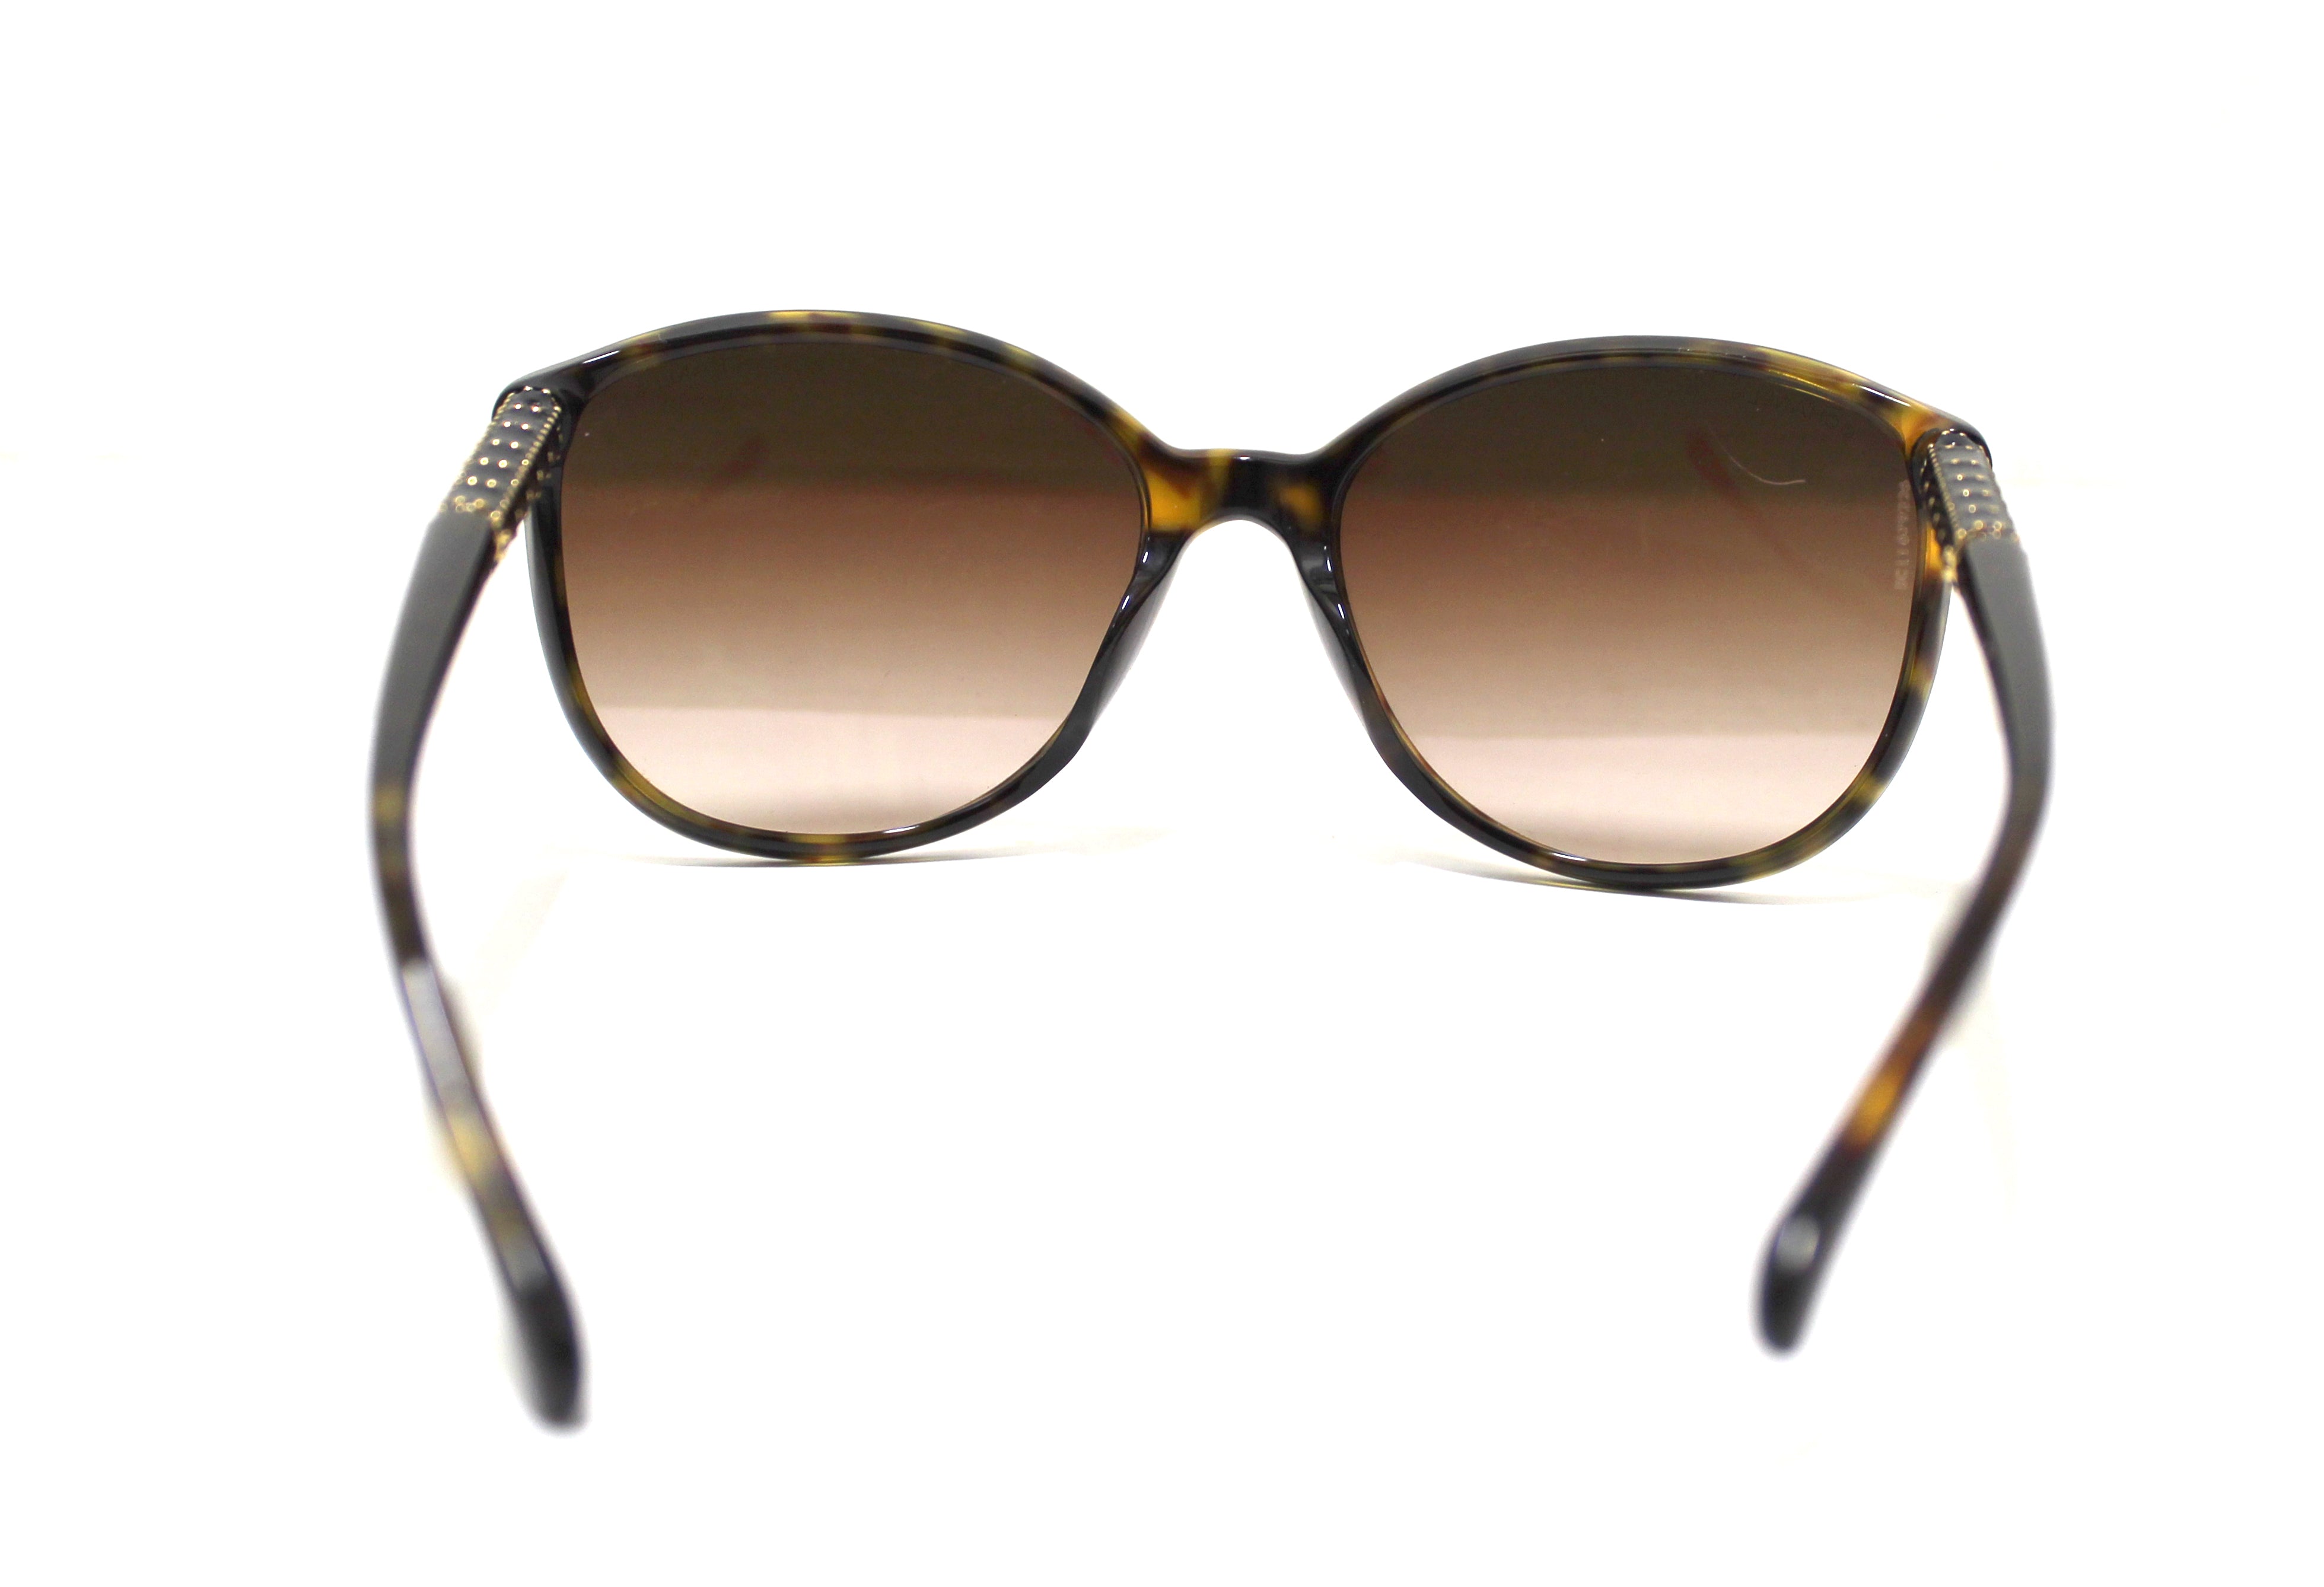 Authentic Chanel tortoise shell sunglasses 5207-A